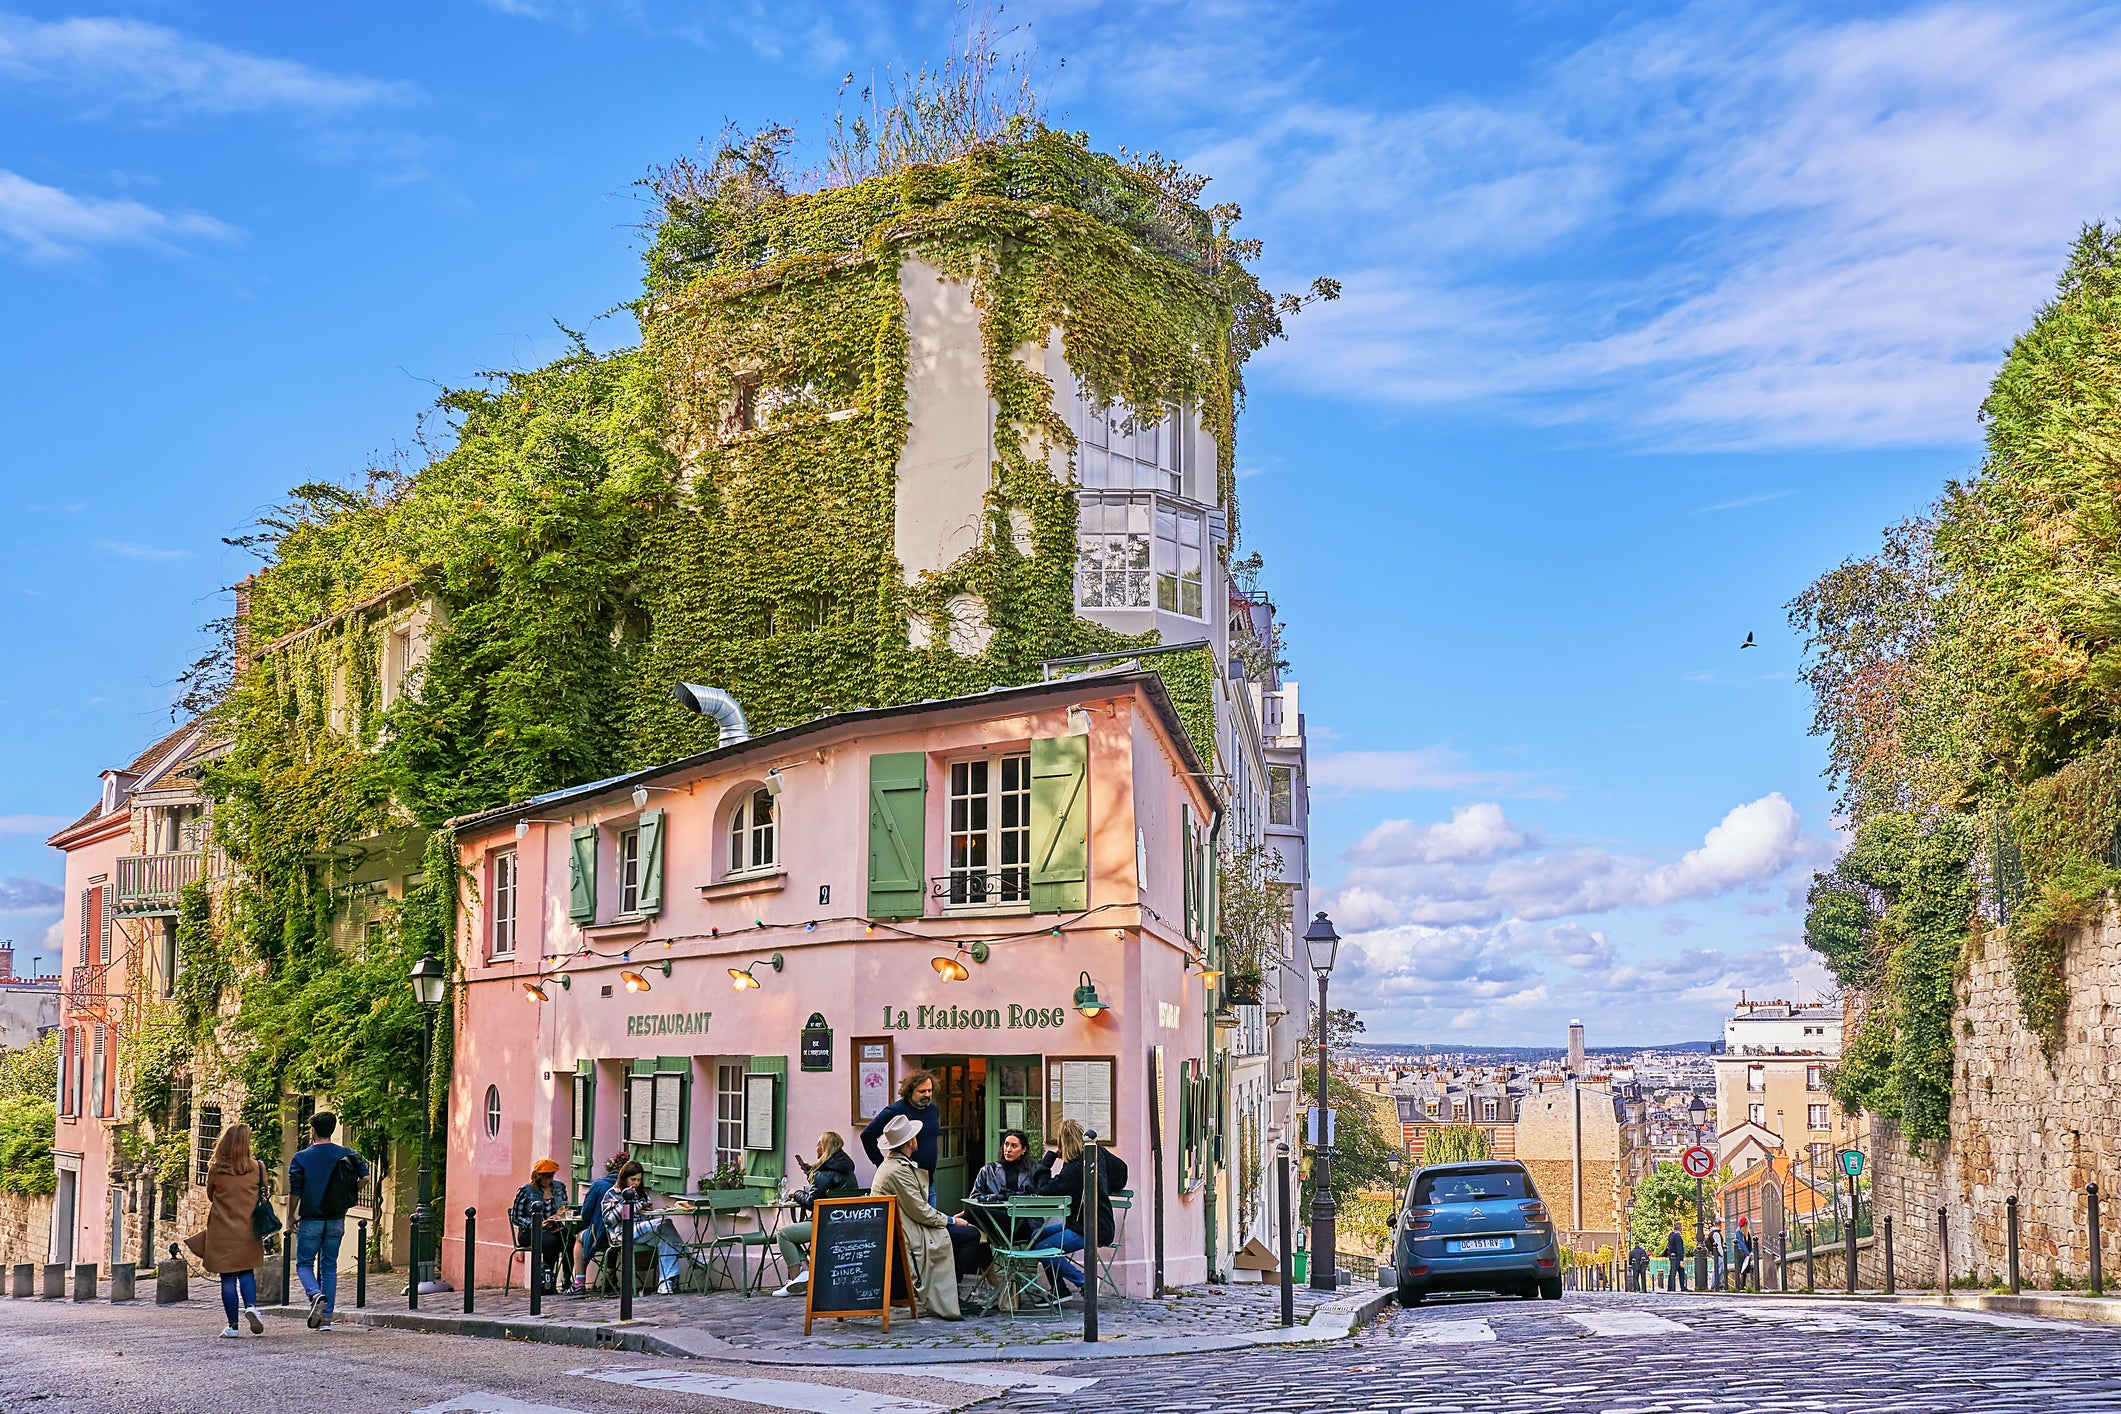 The ‘village’ of Paris buzzes with tourists and caffeine